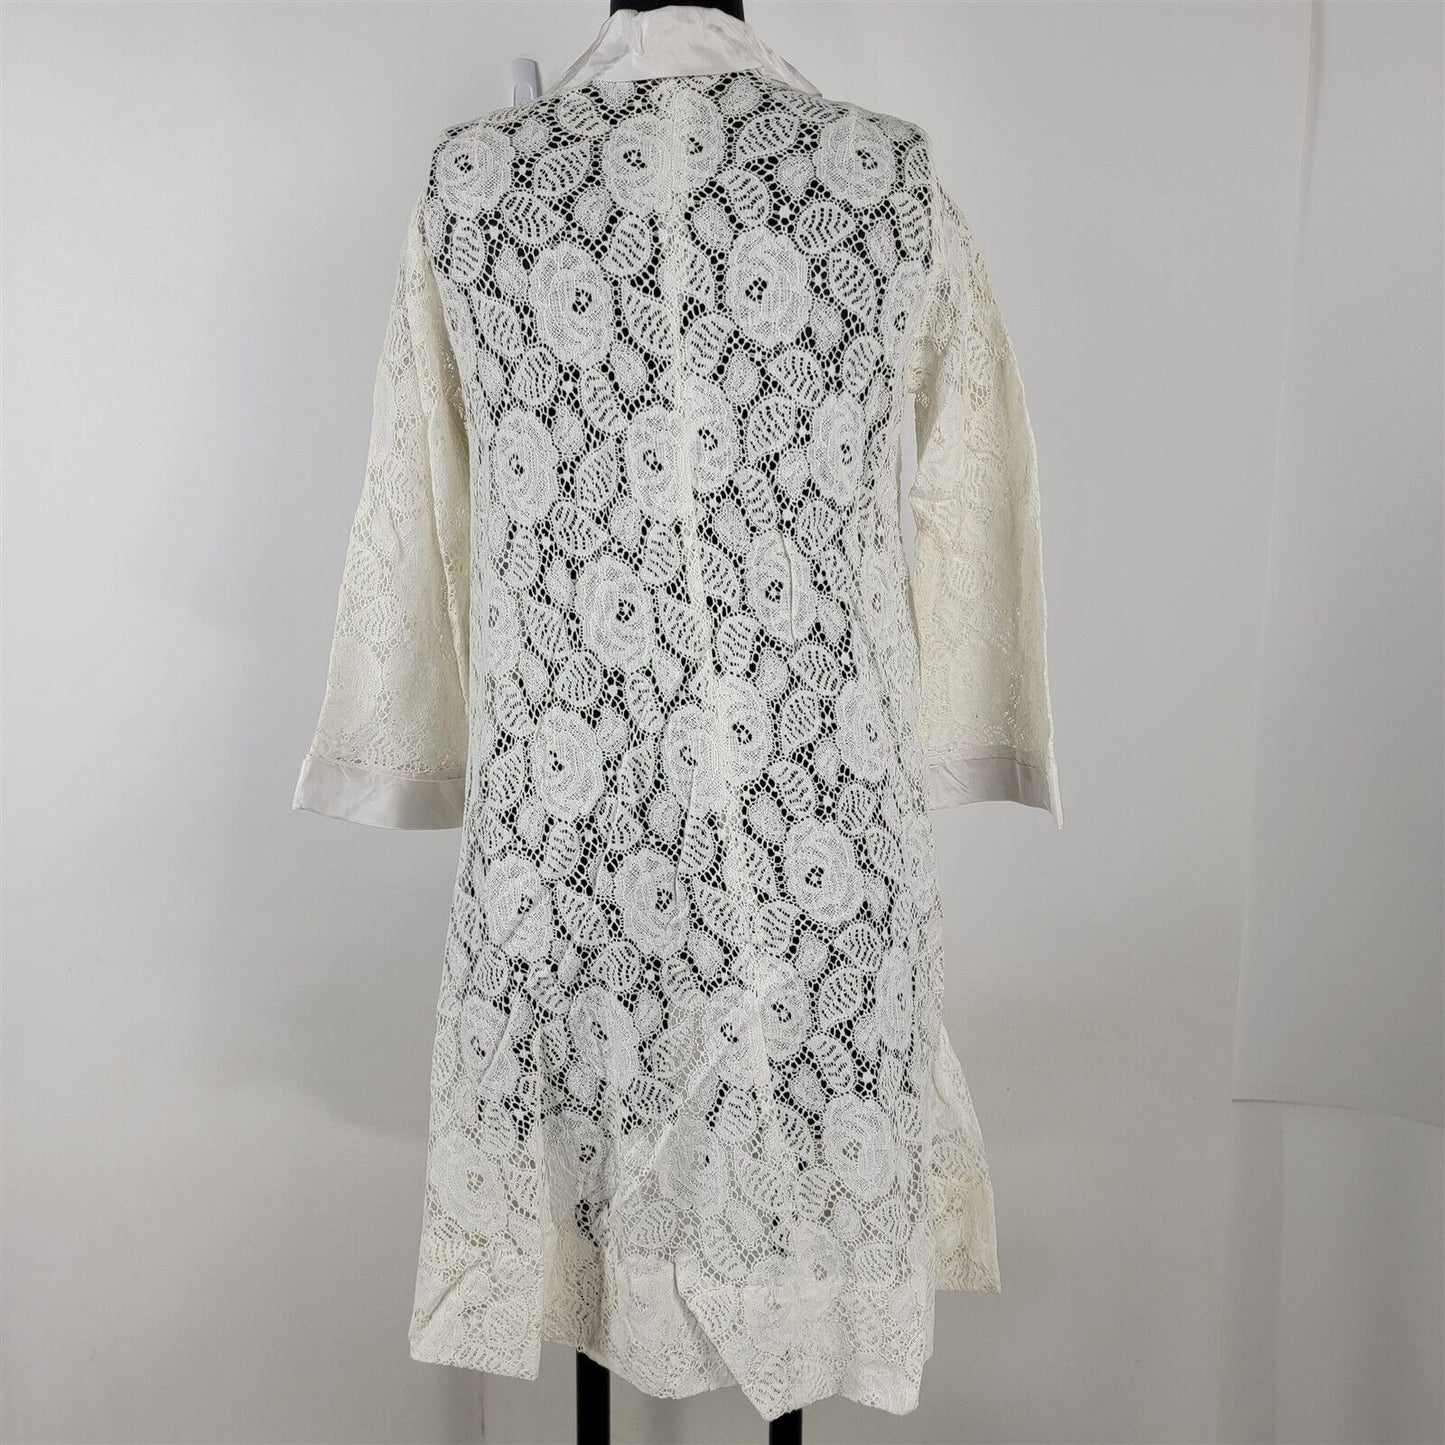 Vintage 1960s White Cream Lace Jacket Womens Size Small